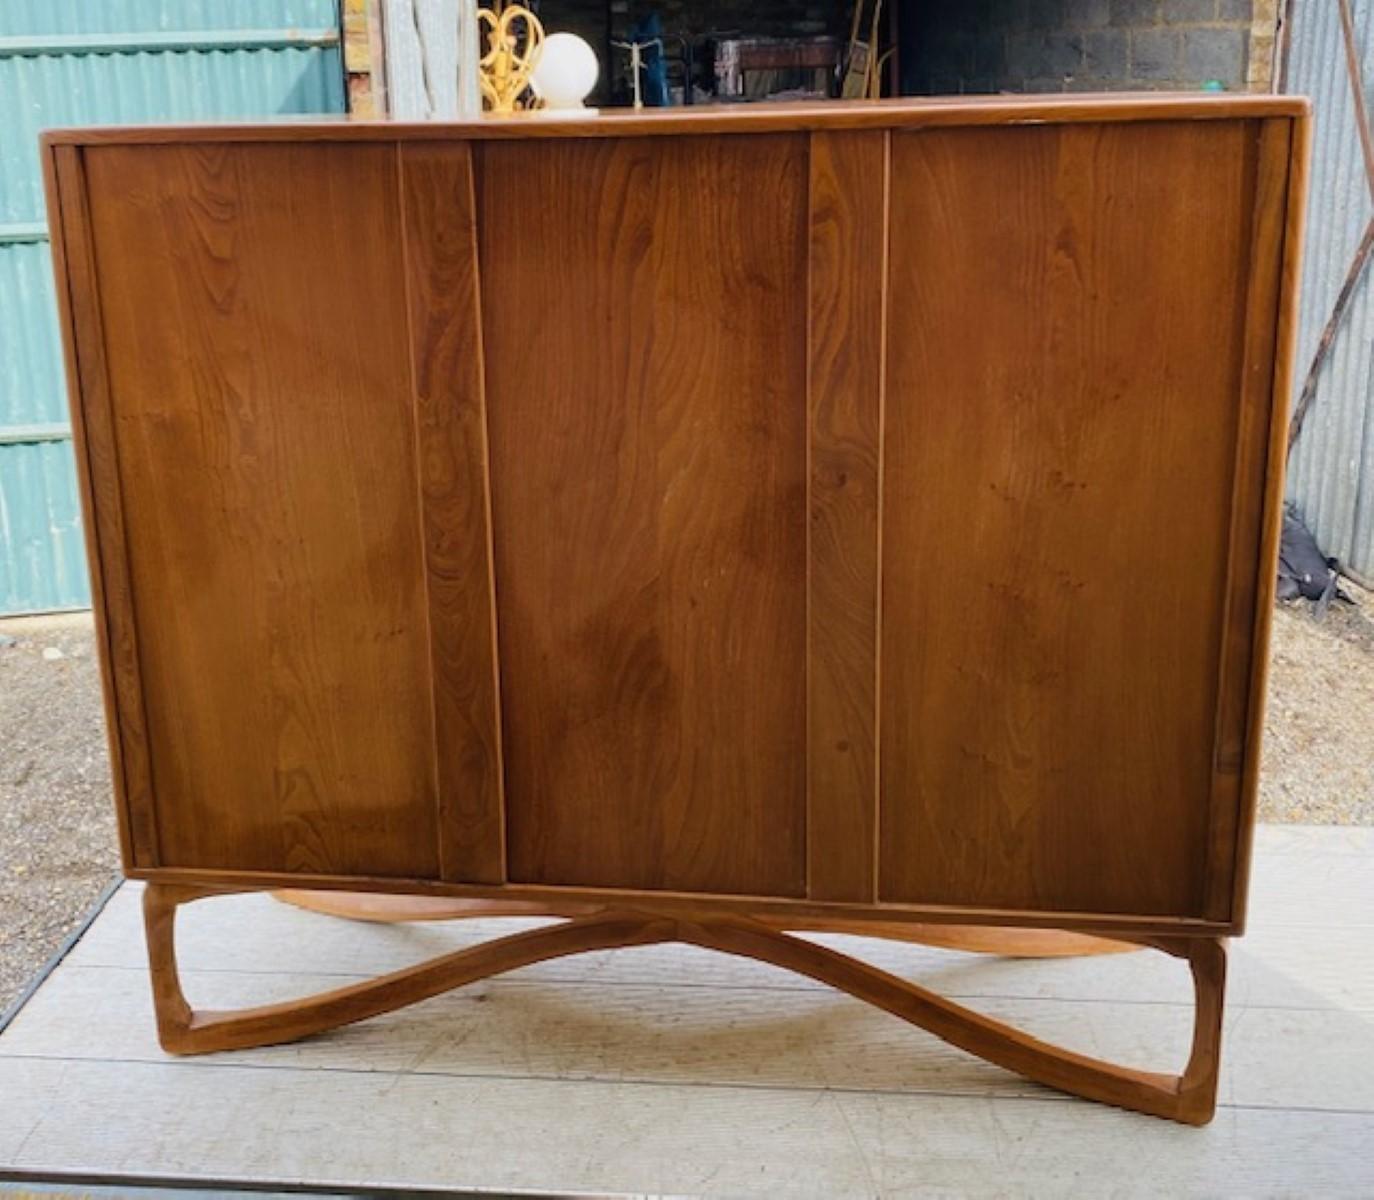 Rare Ercol Tall Sideboard / Drinks Cabinet, English, by Lucian Ercolani, 1960s For Sale 3